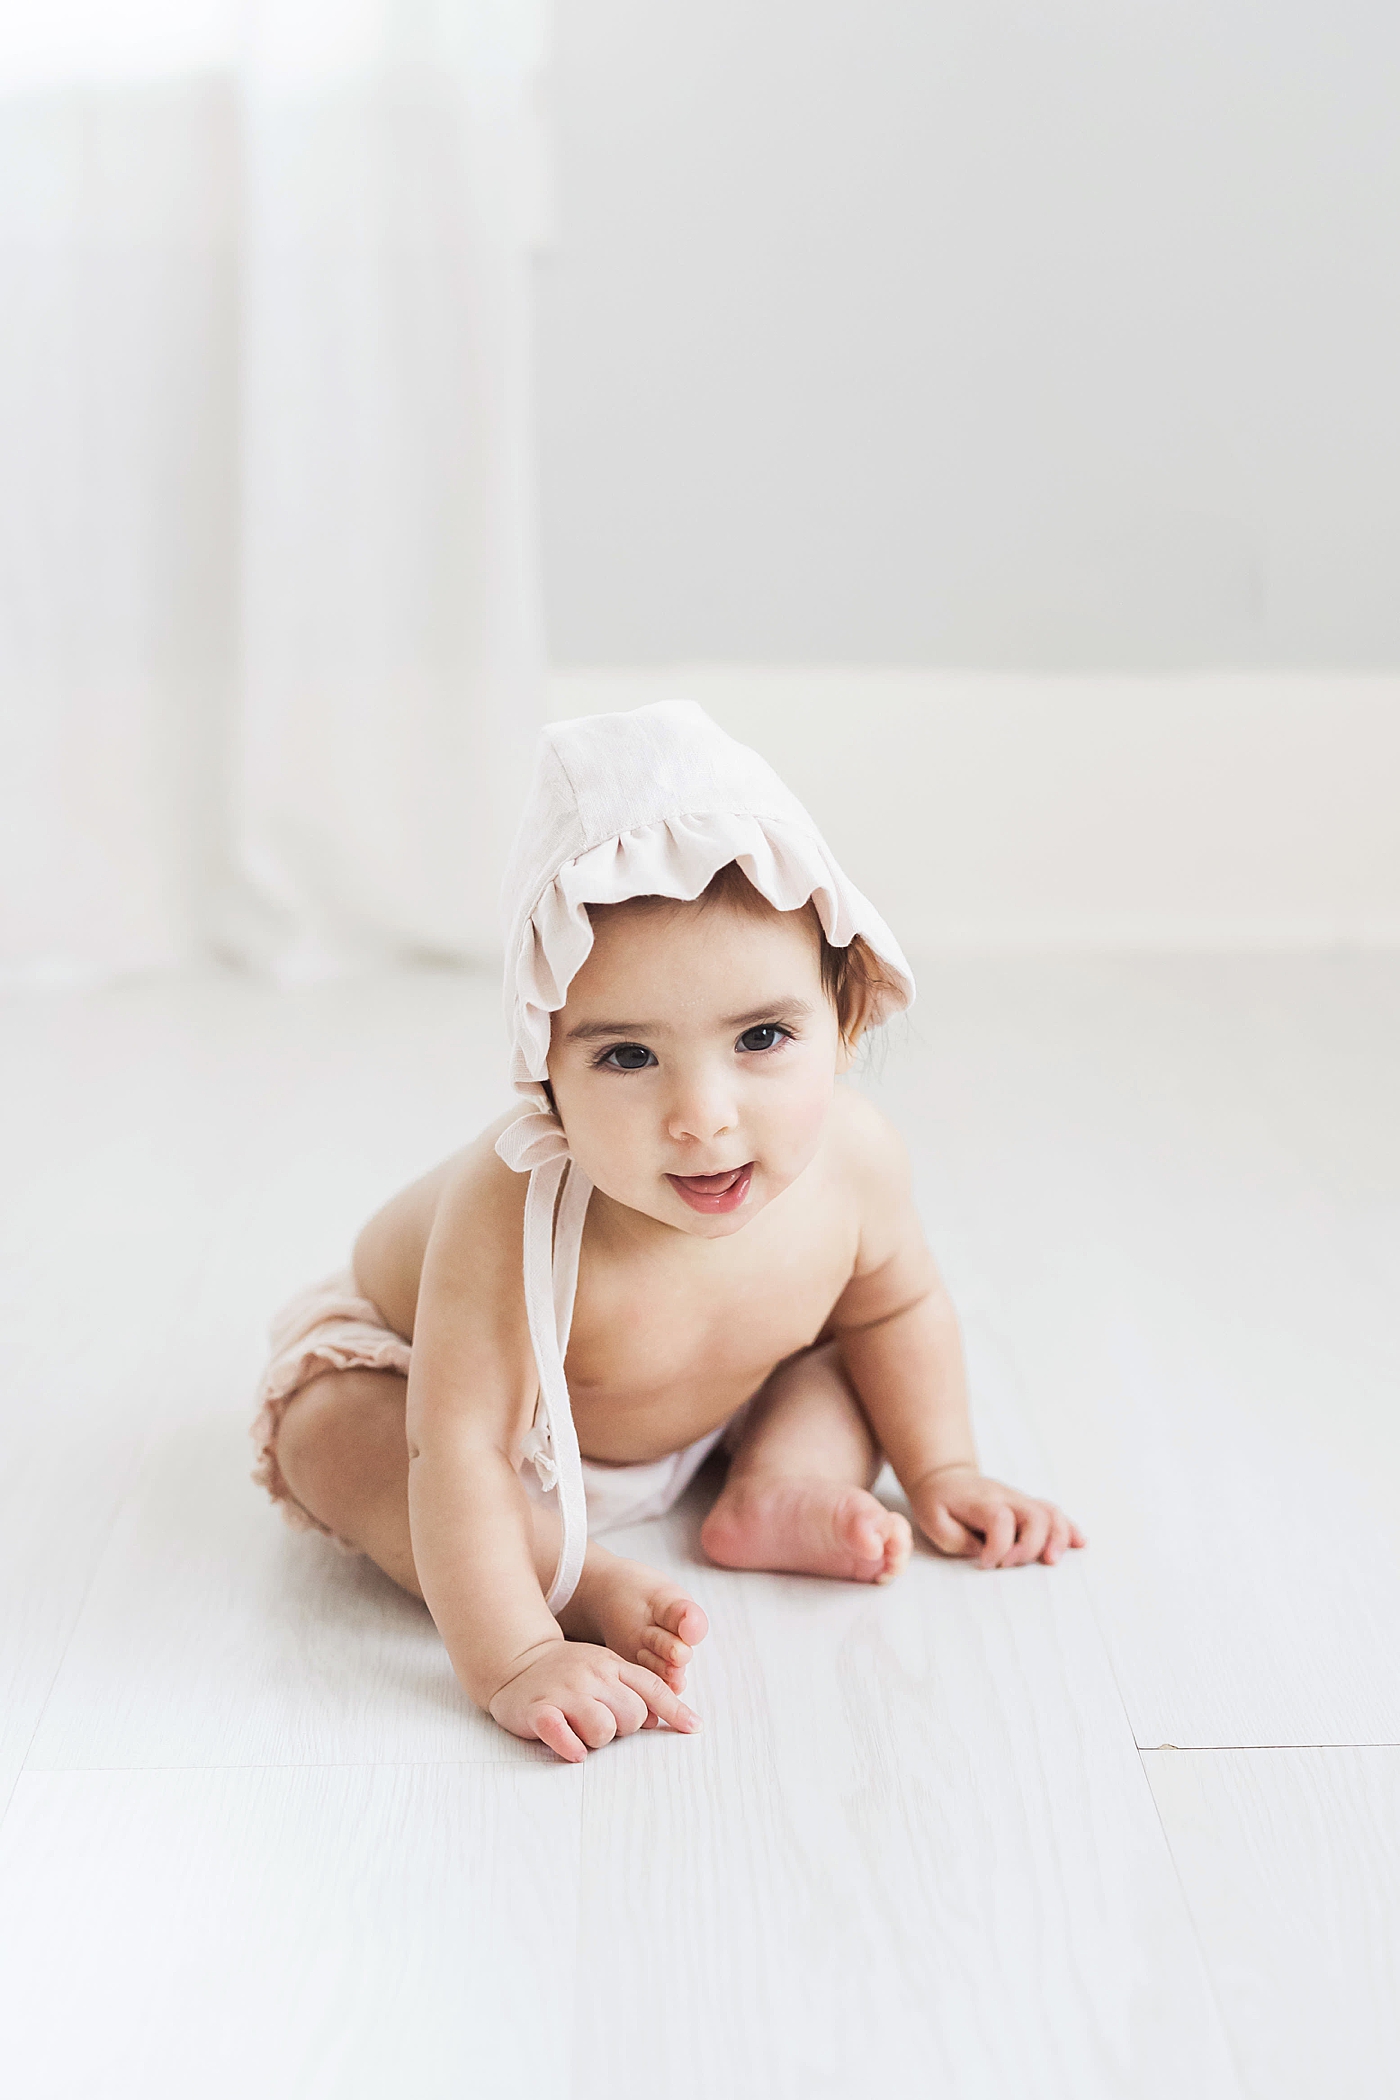 Six month old in light pink bonnet. Photo by Fresh Light Photography.